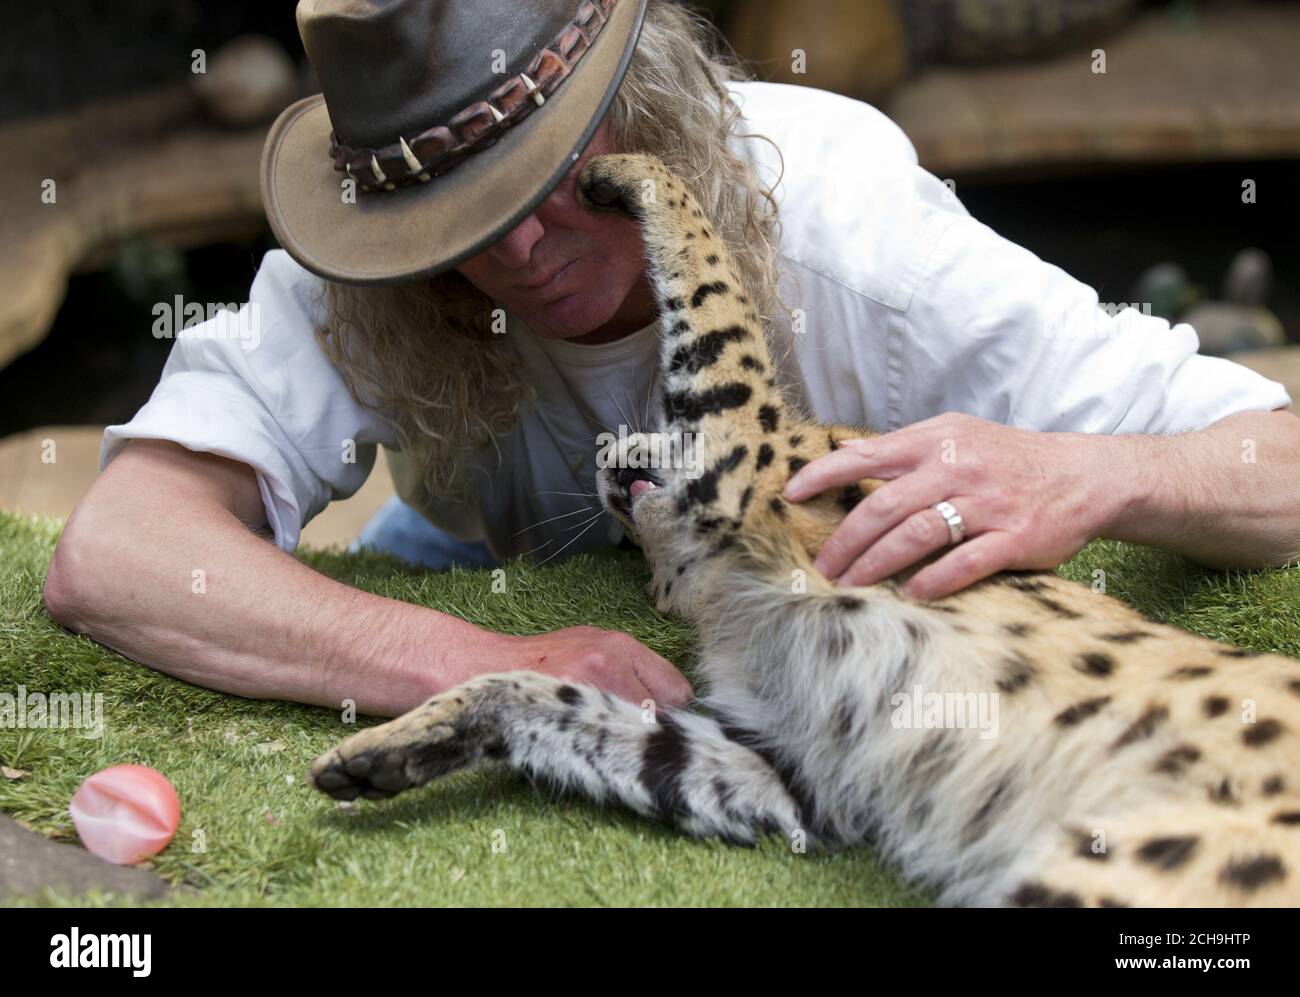 Iain Newby with his serval cat Squeaks, aged 1 1/2, at his home in Great Wakering, Essex, as lions, wolves and deadly venomous snakes are among thousands of dangerous animals being kept on private properties across the UK, figures have revealed. Stock Photo